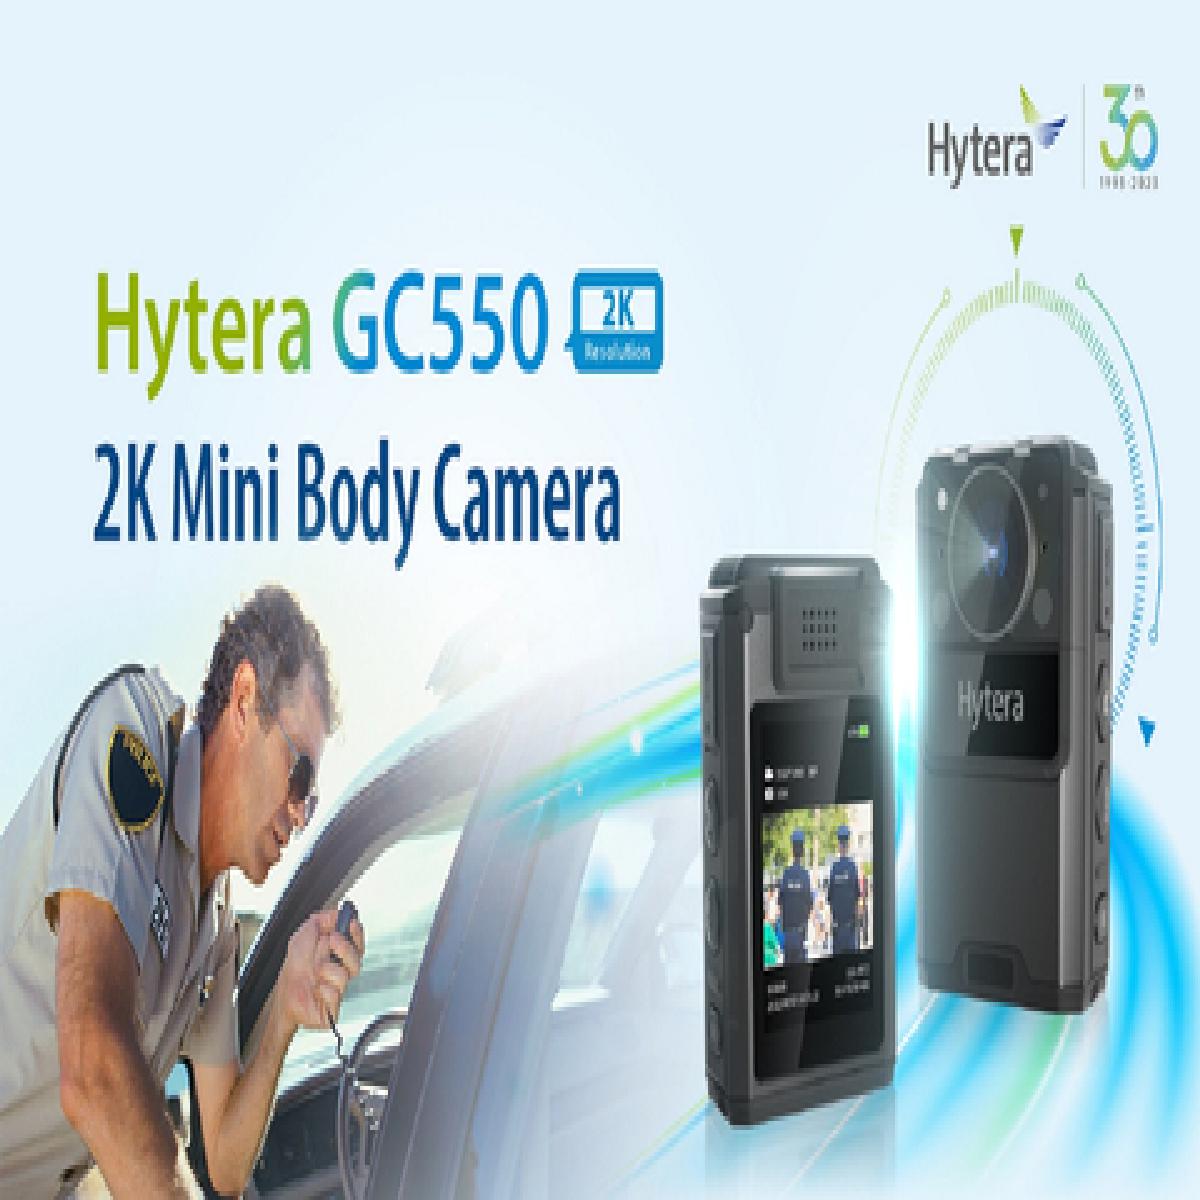 Hytera Releases Compact Body Worn Camera with 2K Resolution